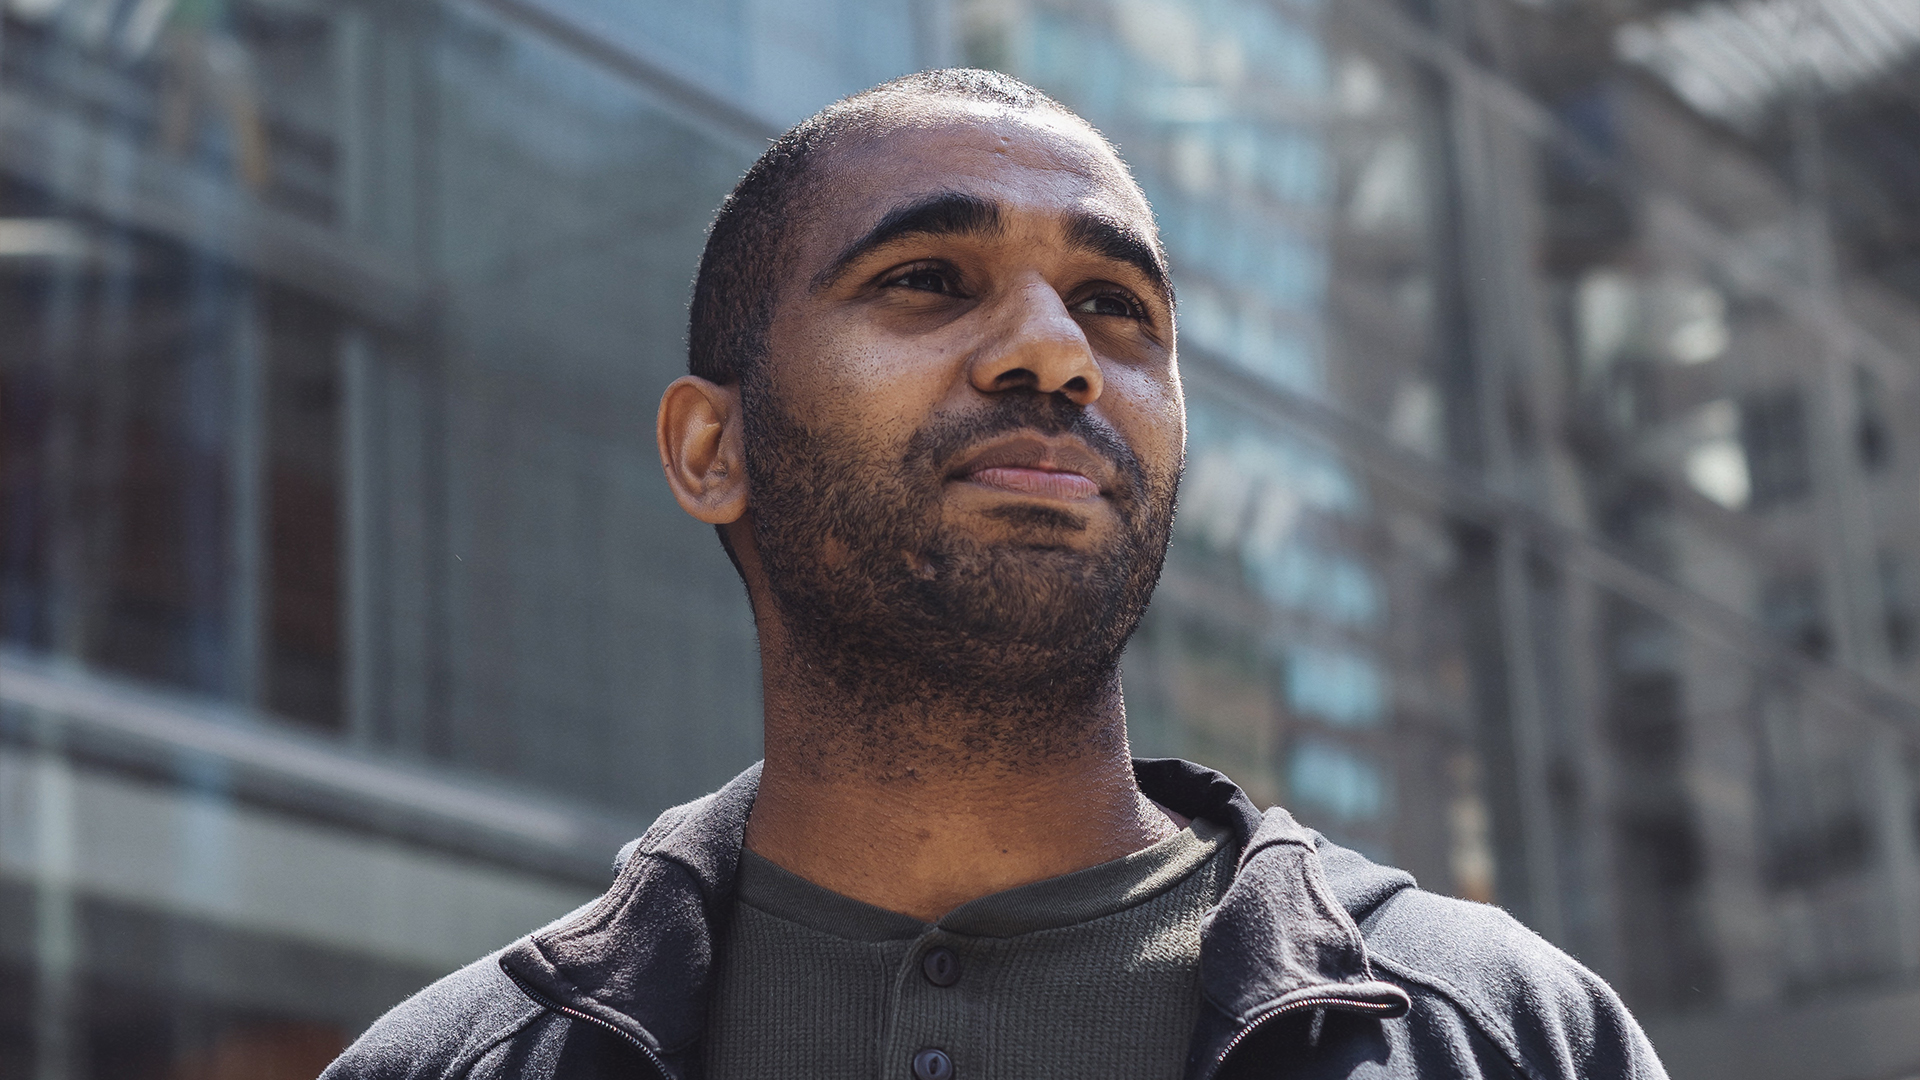 Cody Coleman Was Born In Prison And Is Defying The Odds As Co-Founder Of An AI Startup He Hopes Will Reach Unicorn Status